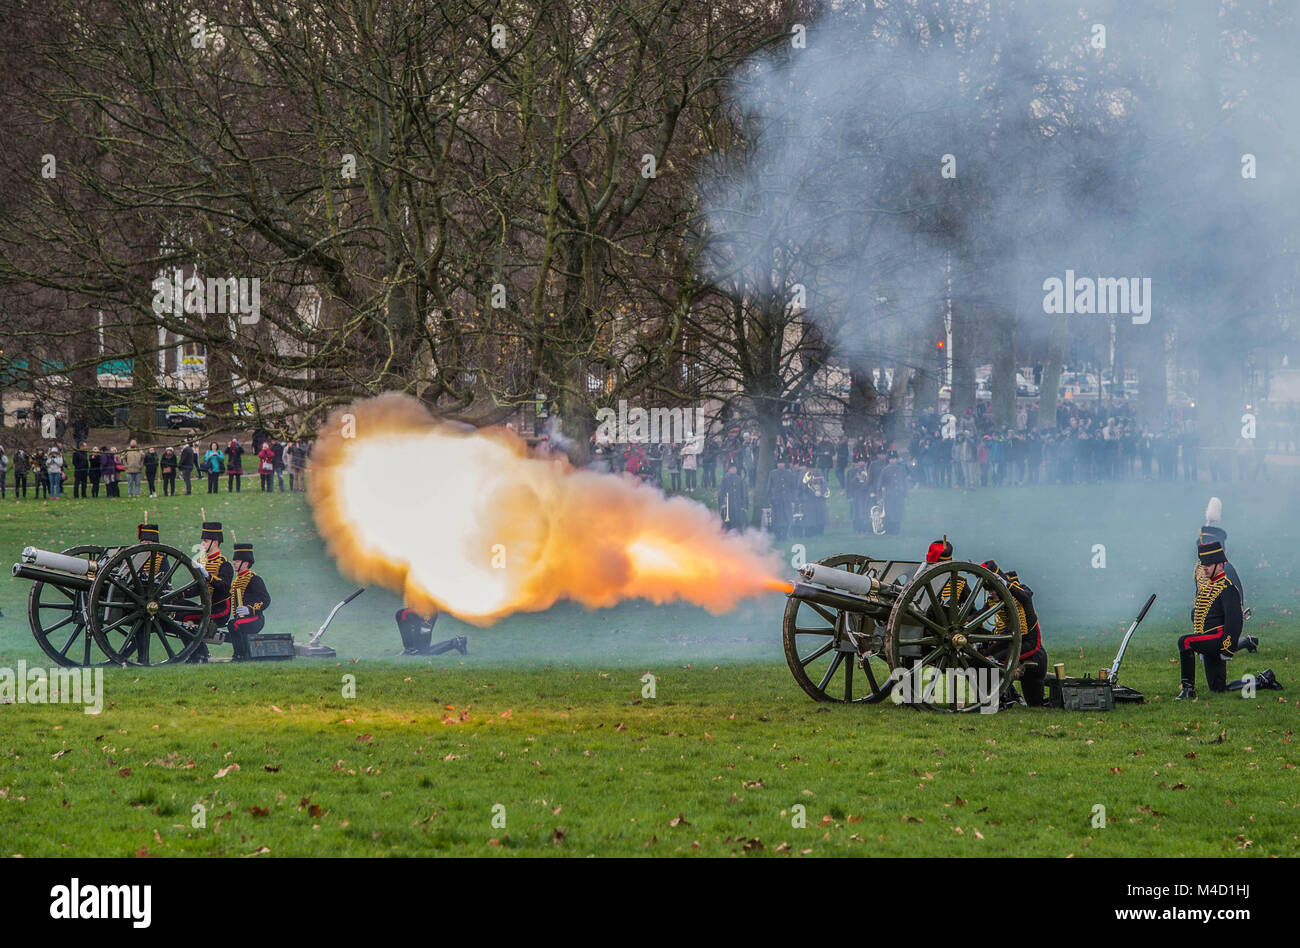 London, UK. 06 February, 2018. The King’s Troop Royal Horse Artillery stage a 41-Gun Salute in Green Park to mark the 66th anniversary of Her Majesty Queen Elizabeth II's Accession to the throne. Stock Photo